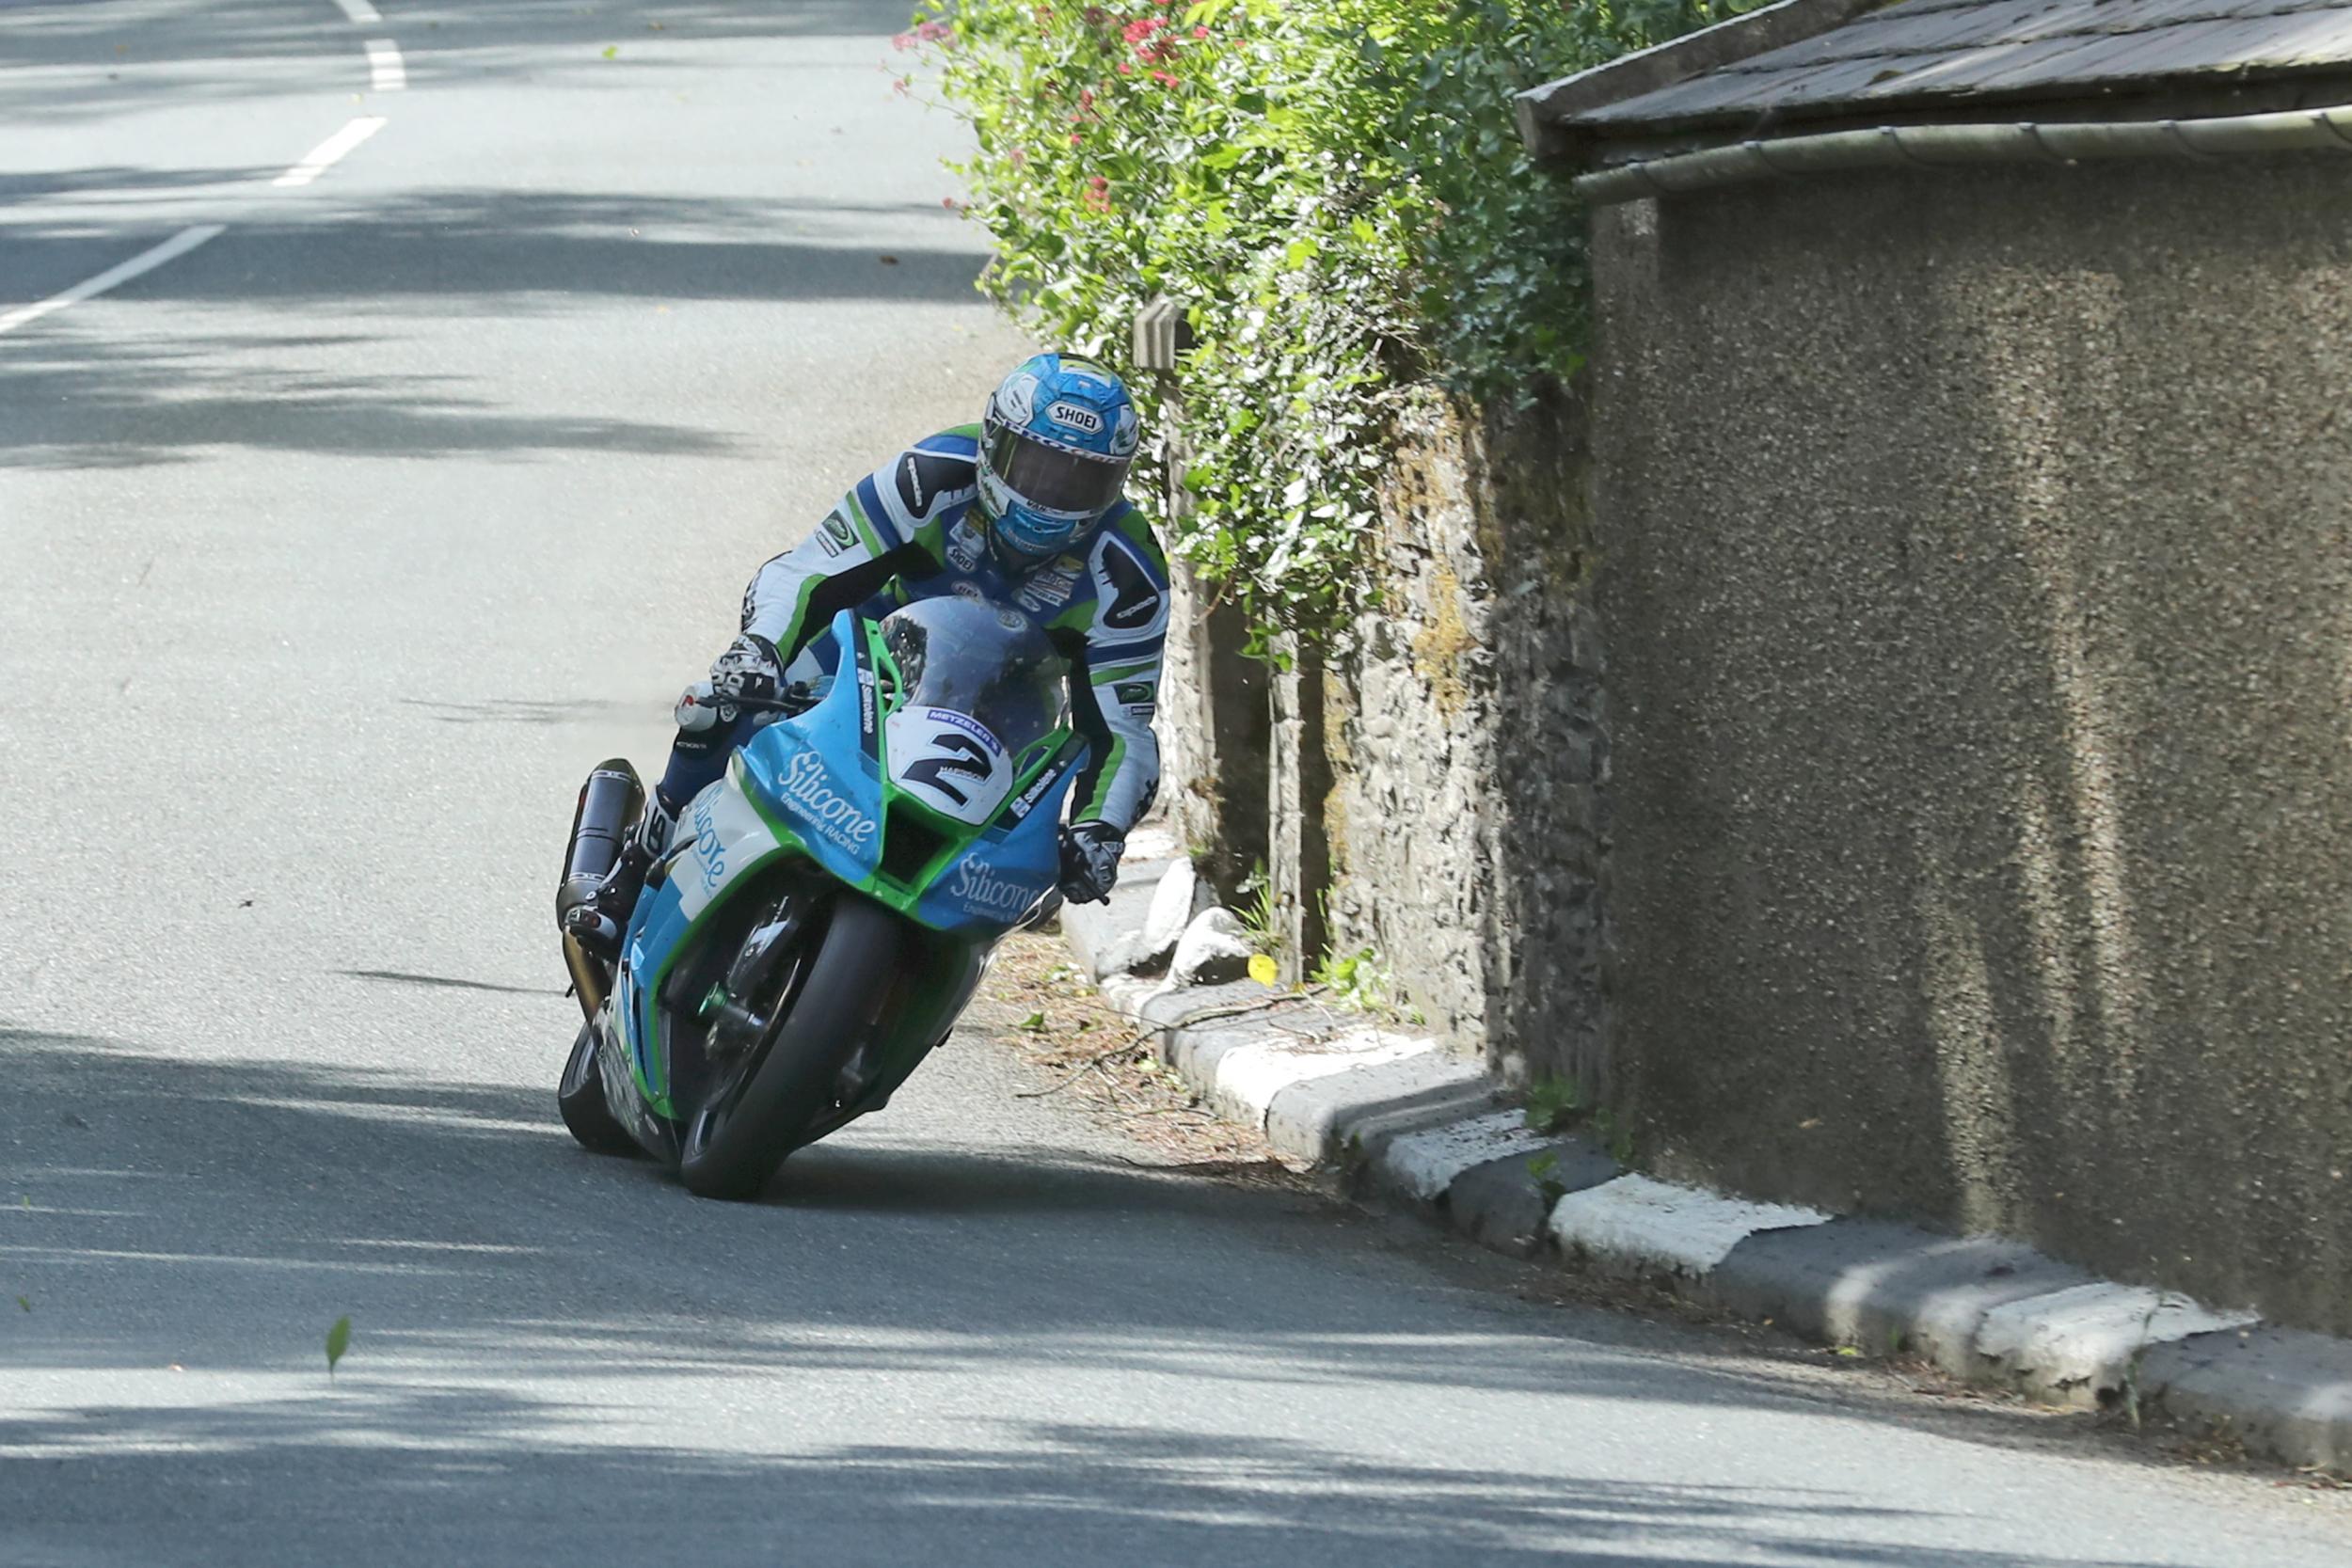 Harrison took his first big bike victory at the TT